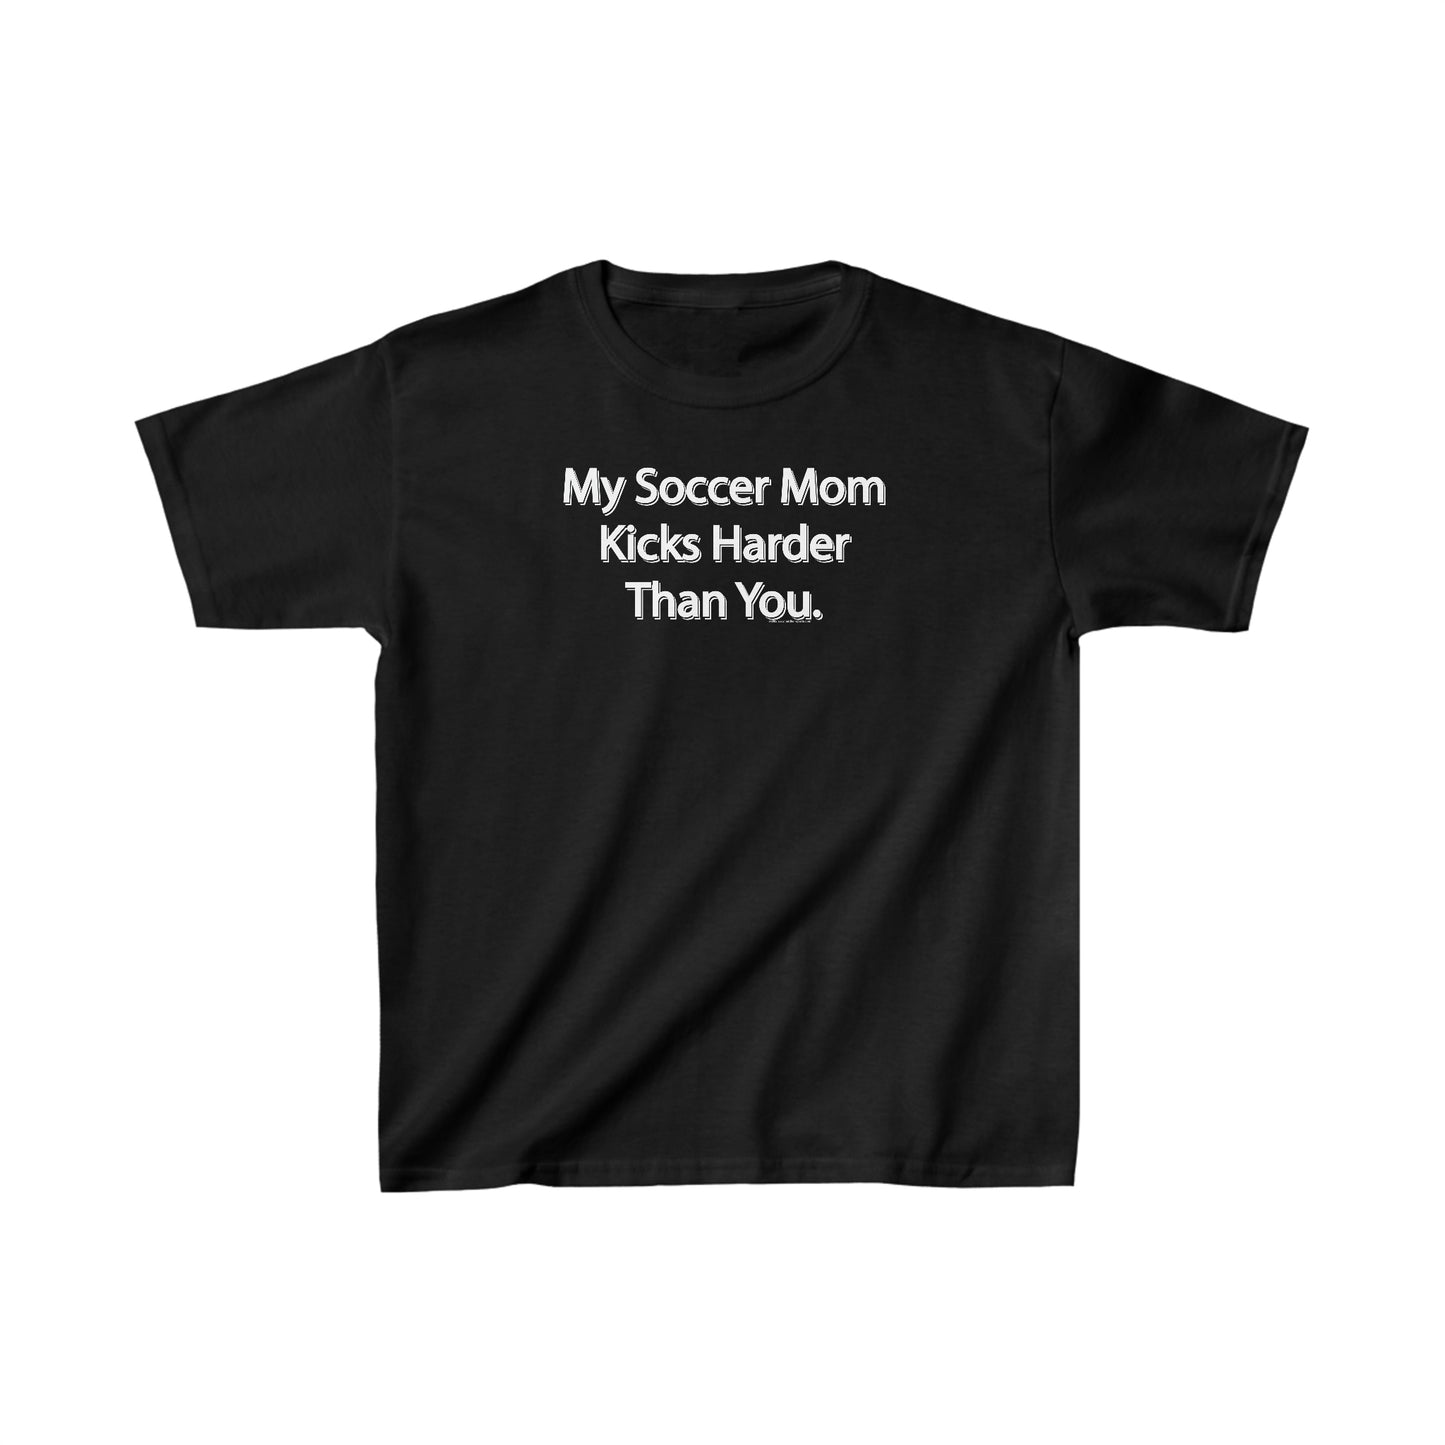 My Soccer Mom Kicks Harder Than You Soccer T-Shirt, Funny Soccer Tee Gift, Soccer Attitude, Soccer players and Fans of Soccer